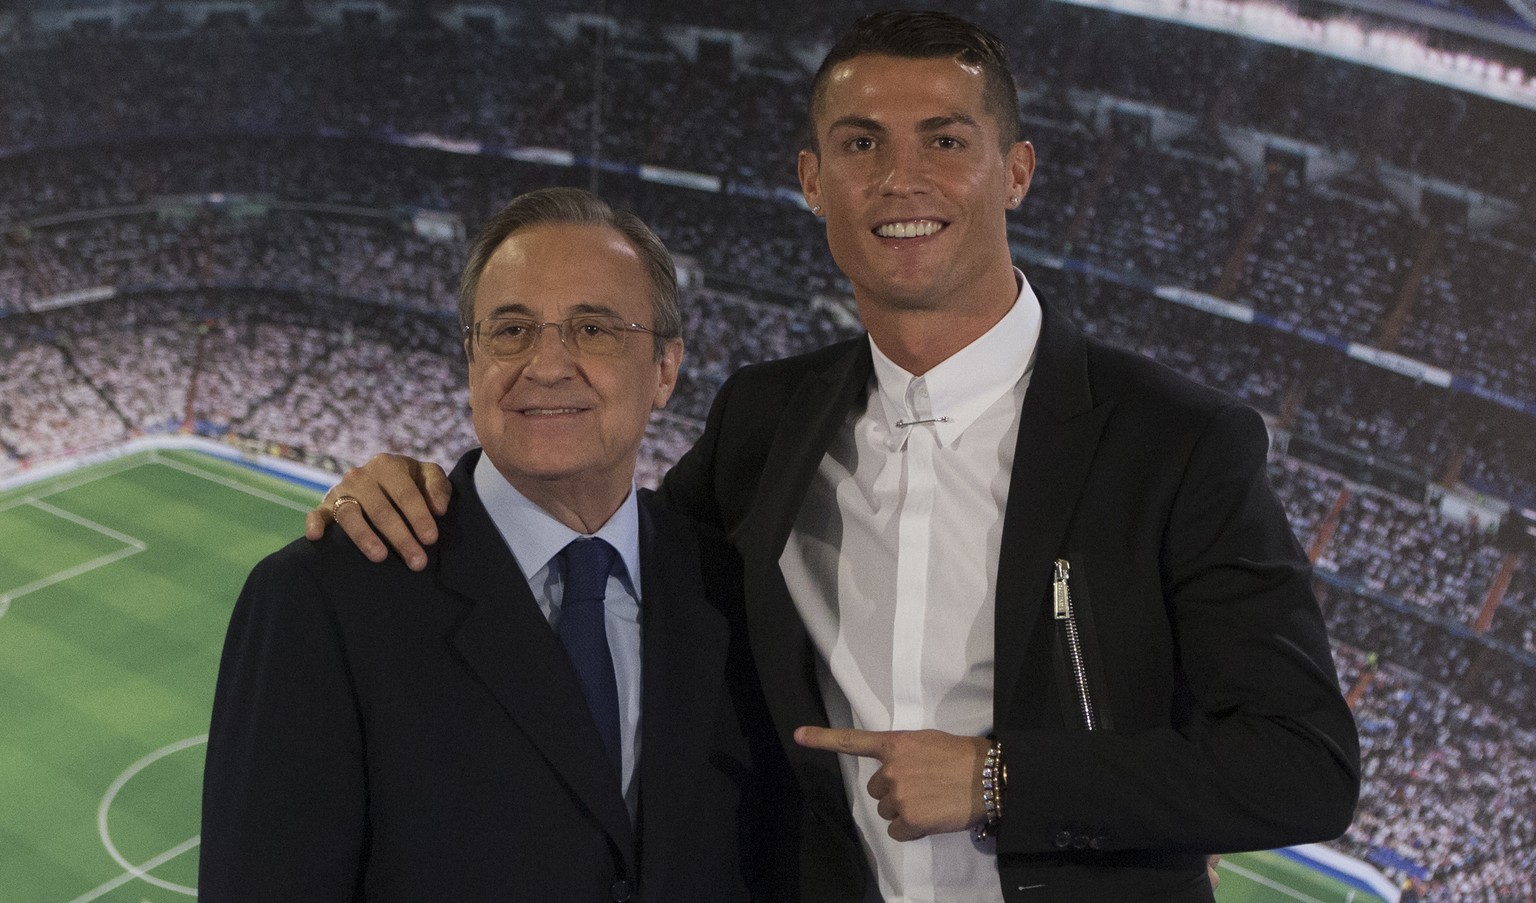 Real Madrid&#039;s Cristiano Ronaldo, right, poses with the club&#039;s President Florentino Perez after signing a new contract at the Santiago Bernabeu stadium in Madrid, Spain, Monday, Nov. 7, 2016. ...